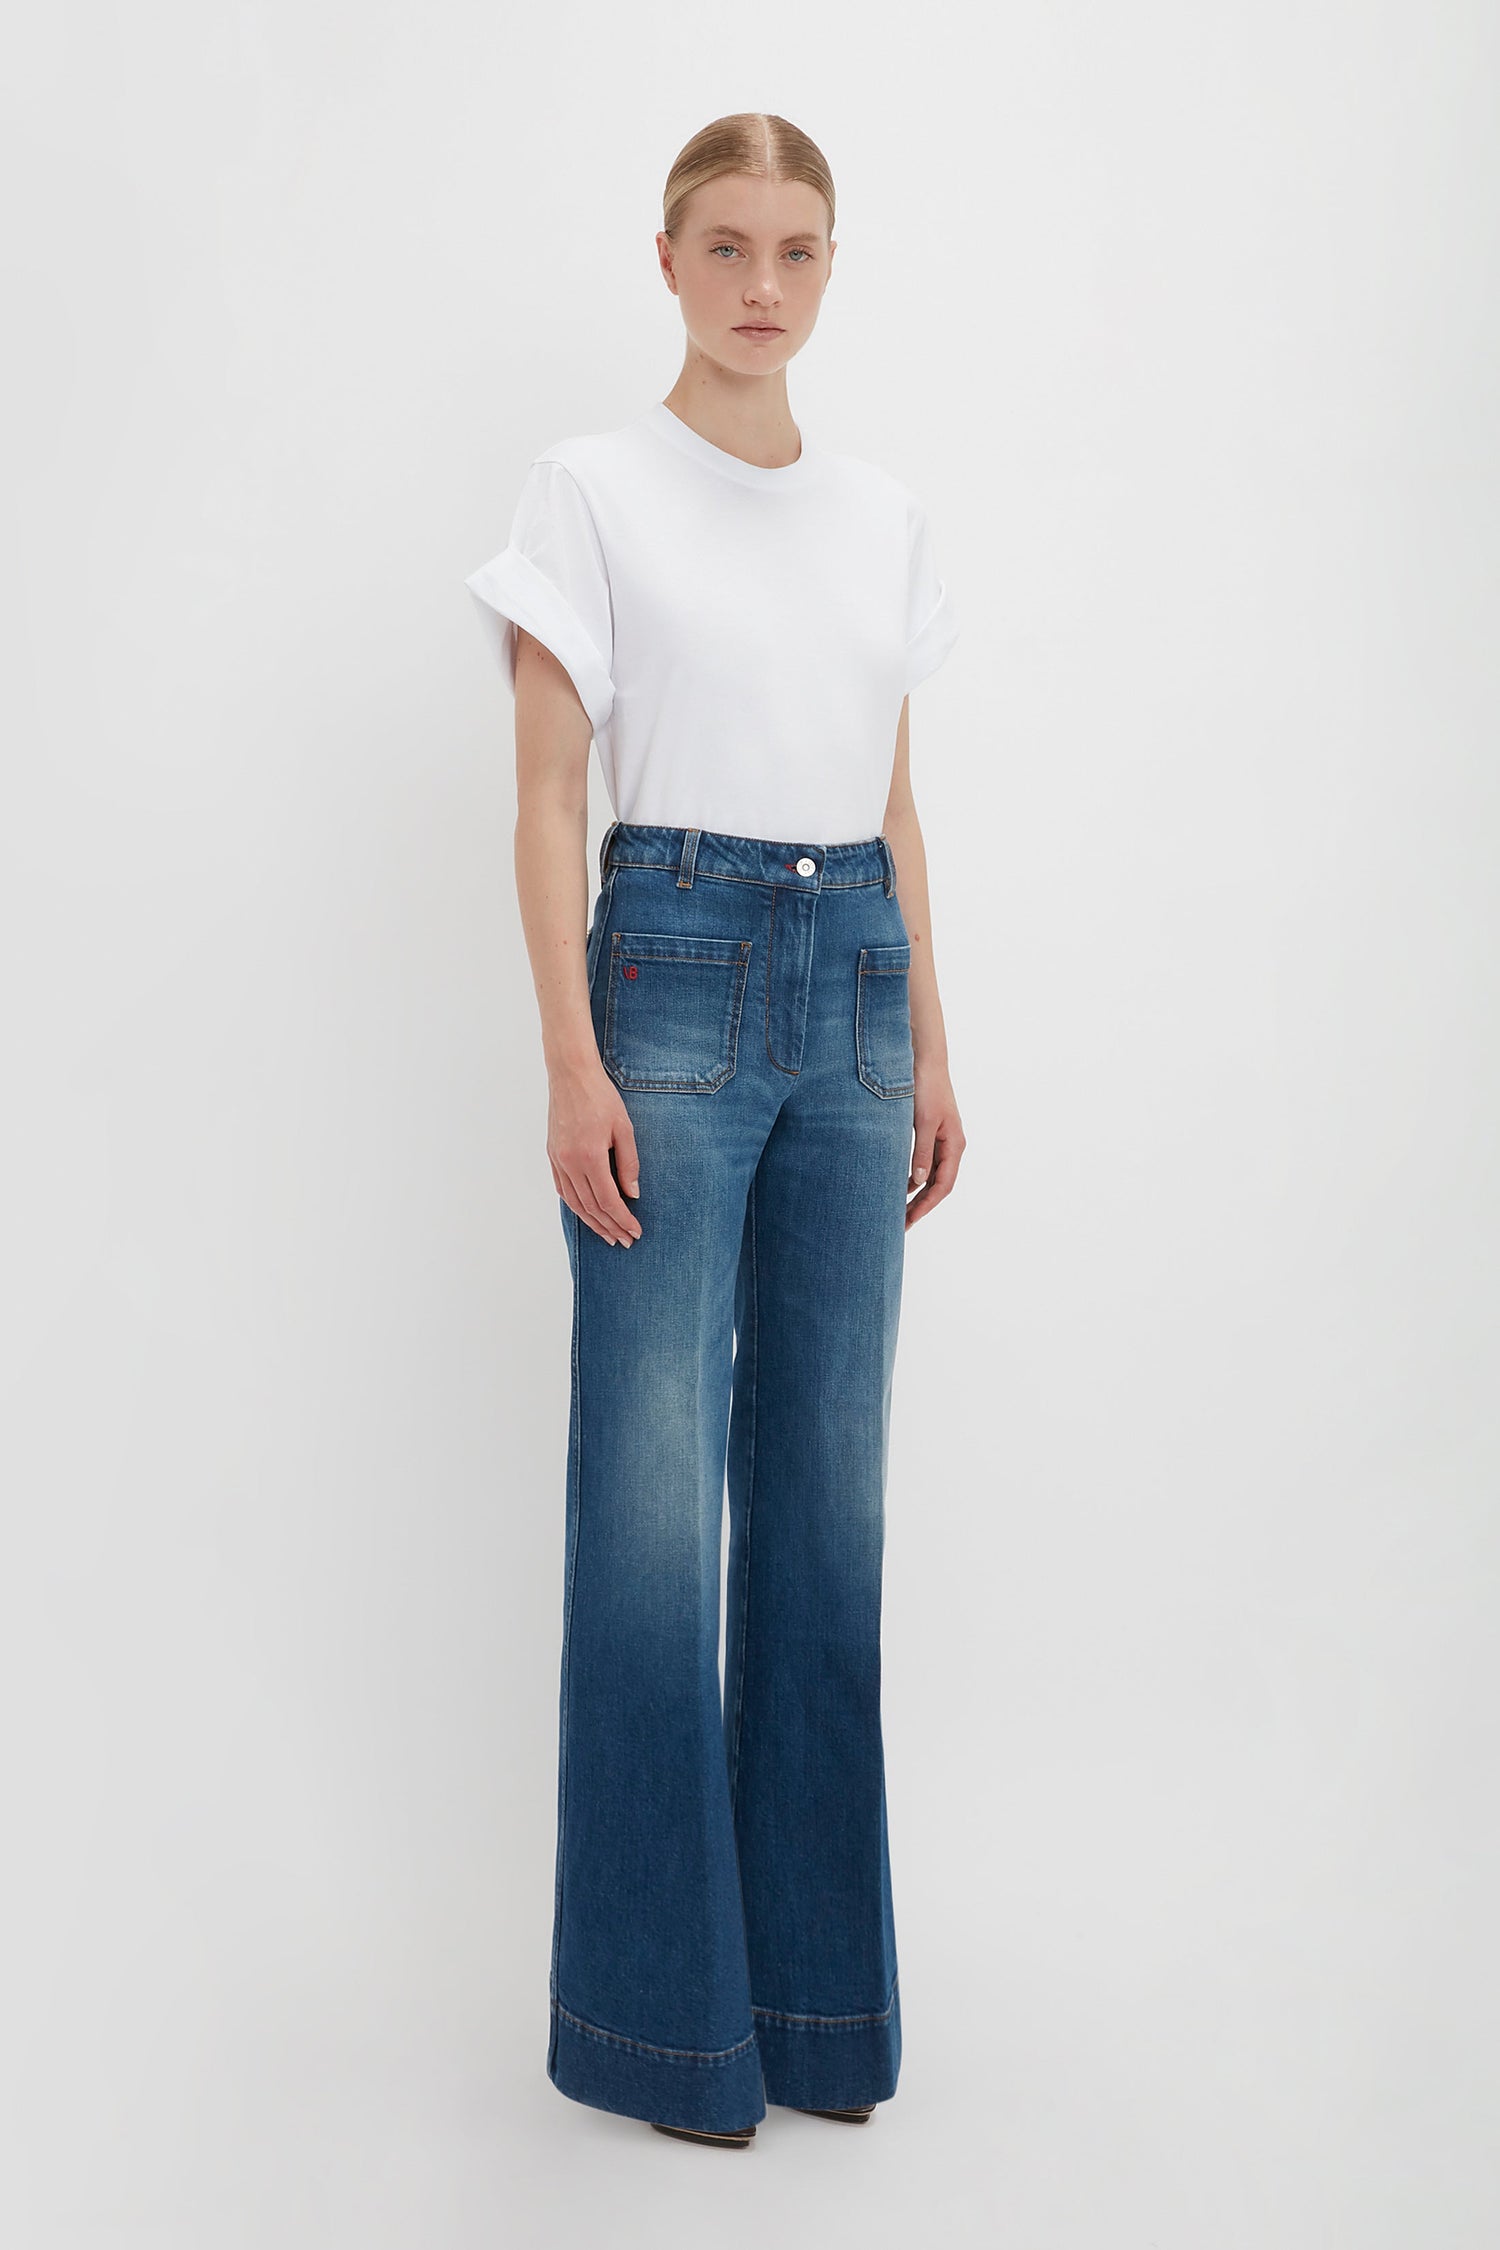 Woman in a Victoria Beckham Asymmetric Relaxed Fit T-Shirt in White and blue high-waisted jeans standing against a white background.